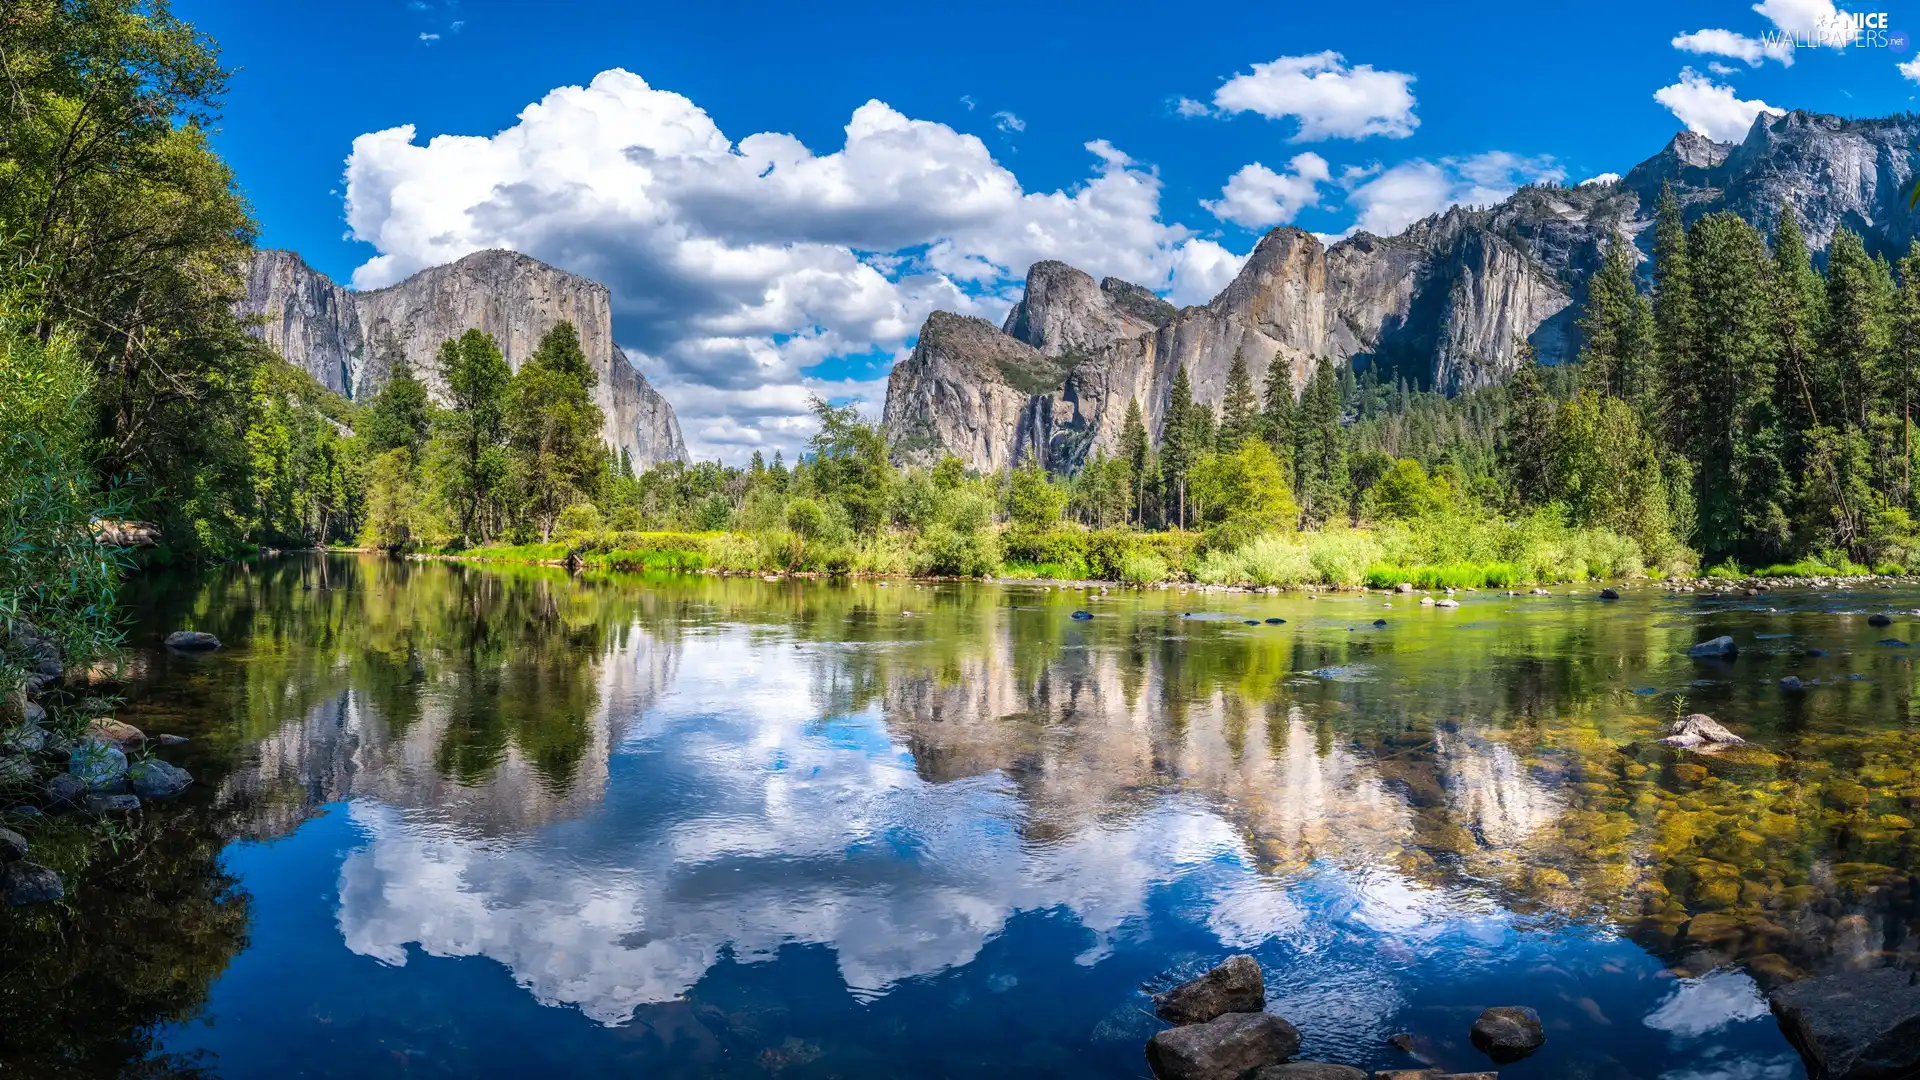 State of California, The United States, Yosemite National Park, Merced River, Sierra Nevada Mountains, clouds, trees, viewes, reflection